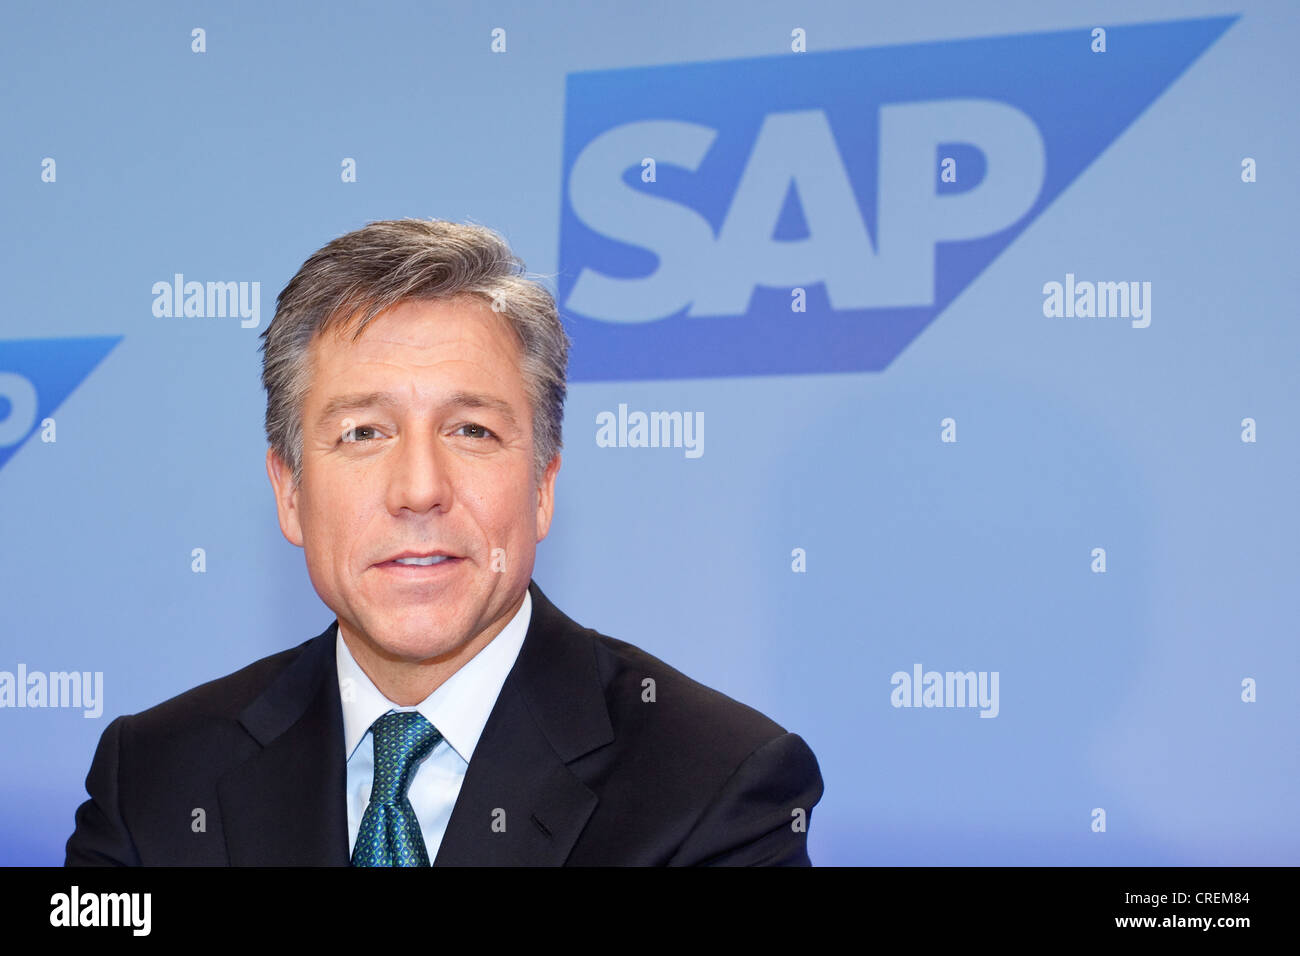 Bill McDermott, co-CEO of SAP AG, during the press conference on financial statements of SAP AG on 26.01.2011 in Frankfurt am Stock Photo